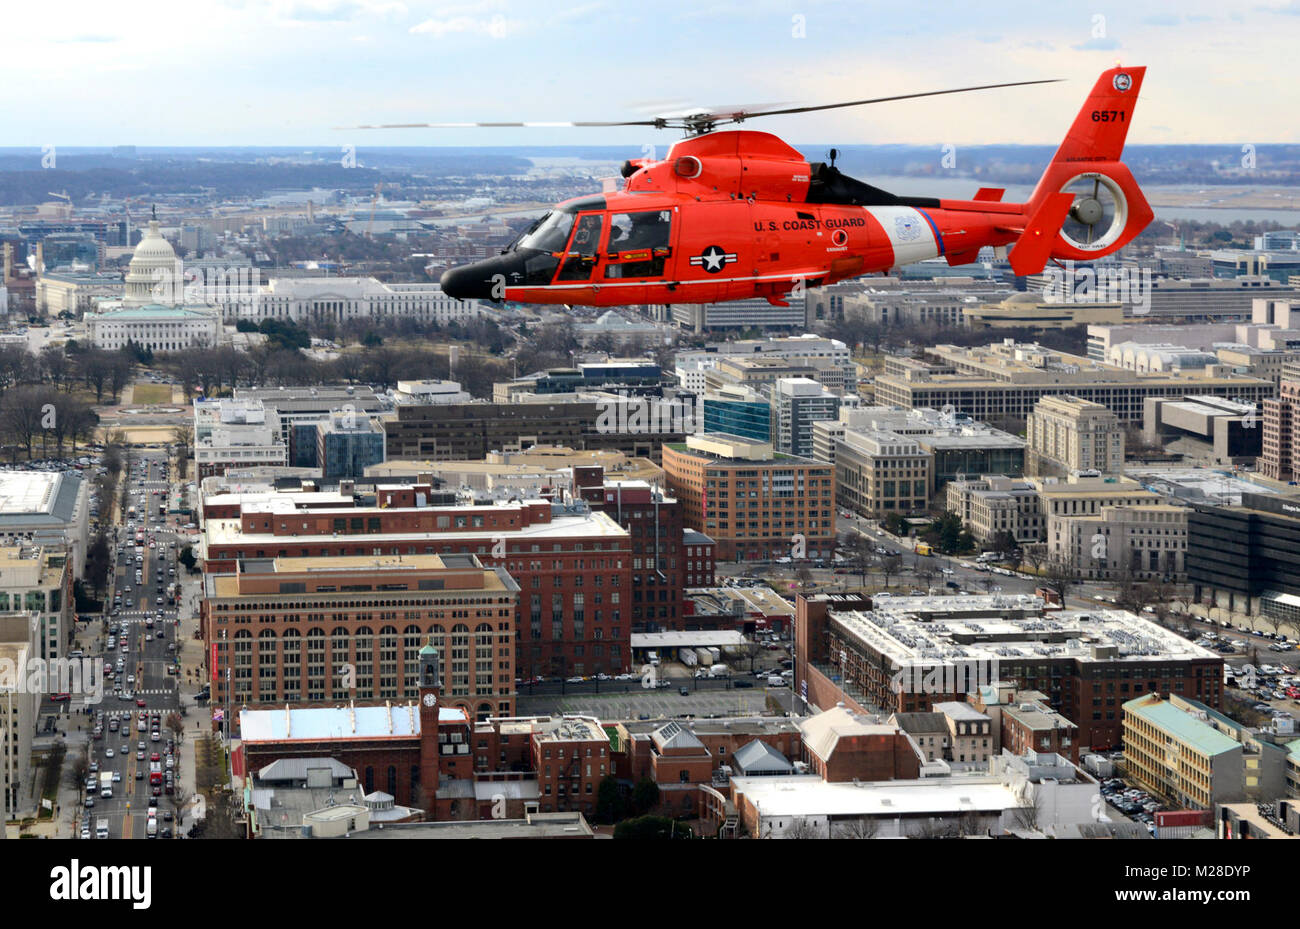 A Coast Guard MH-65 Dolphin helicopter crew from Air Station Atlantic City flies past the Capitol Building as they provide security for the State of the Union address in Washington D.C., Jan. 30, 2018. Crews from Air Station Atlantic City support the National Capital Region Air Defense Facility (NCRADF) by supplying multiple aircraft to assist the North American Aerospace Defense Command (NORAD). U.S. Coast Guard Stock Photo